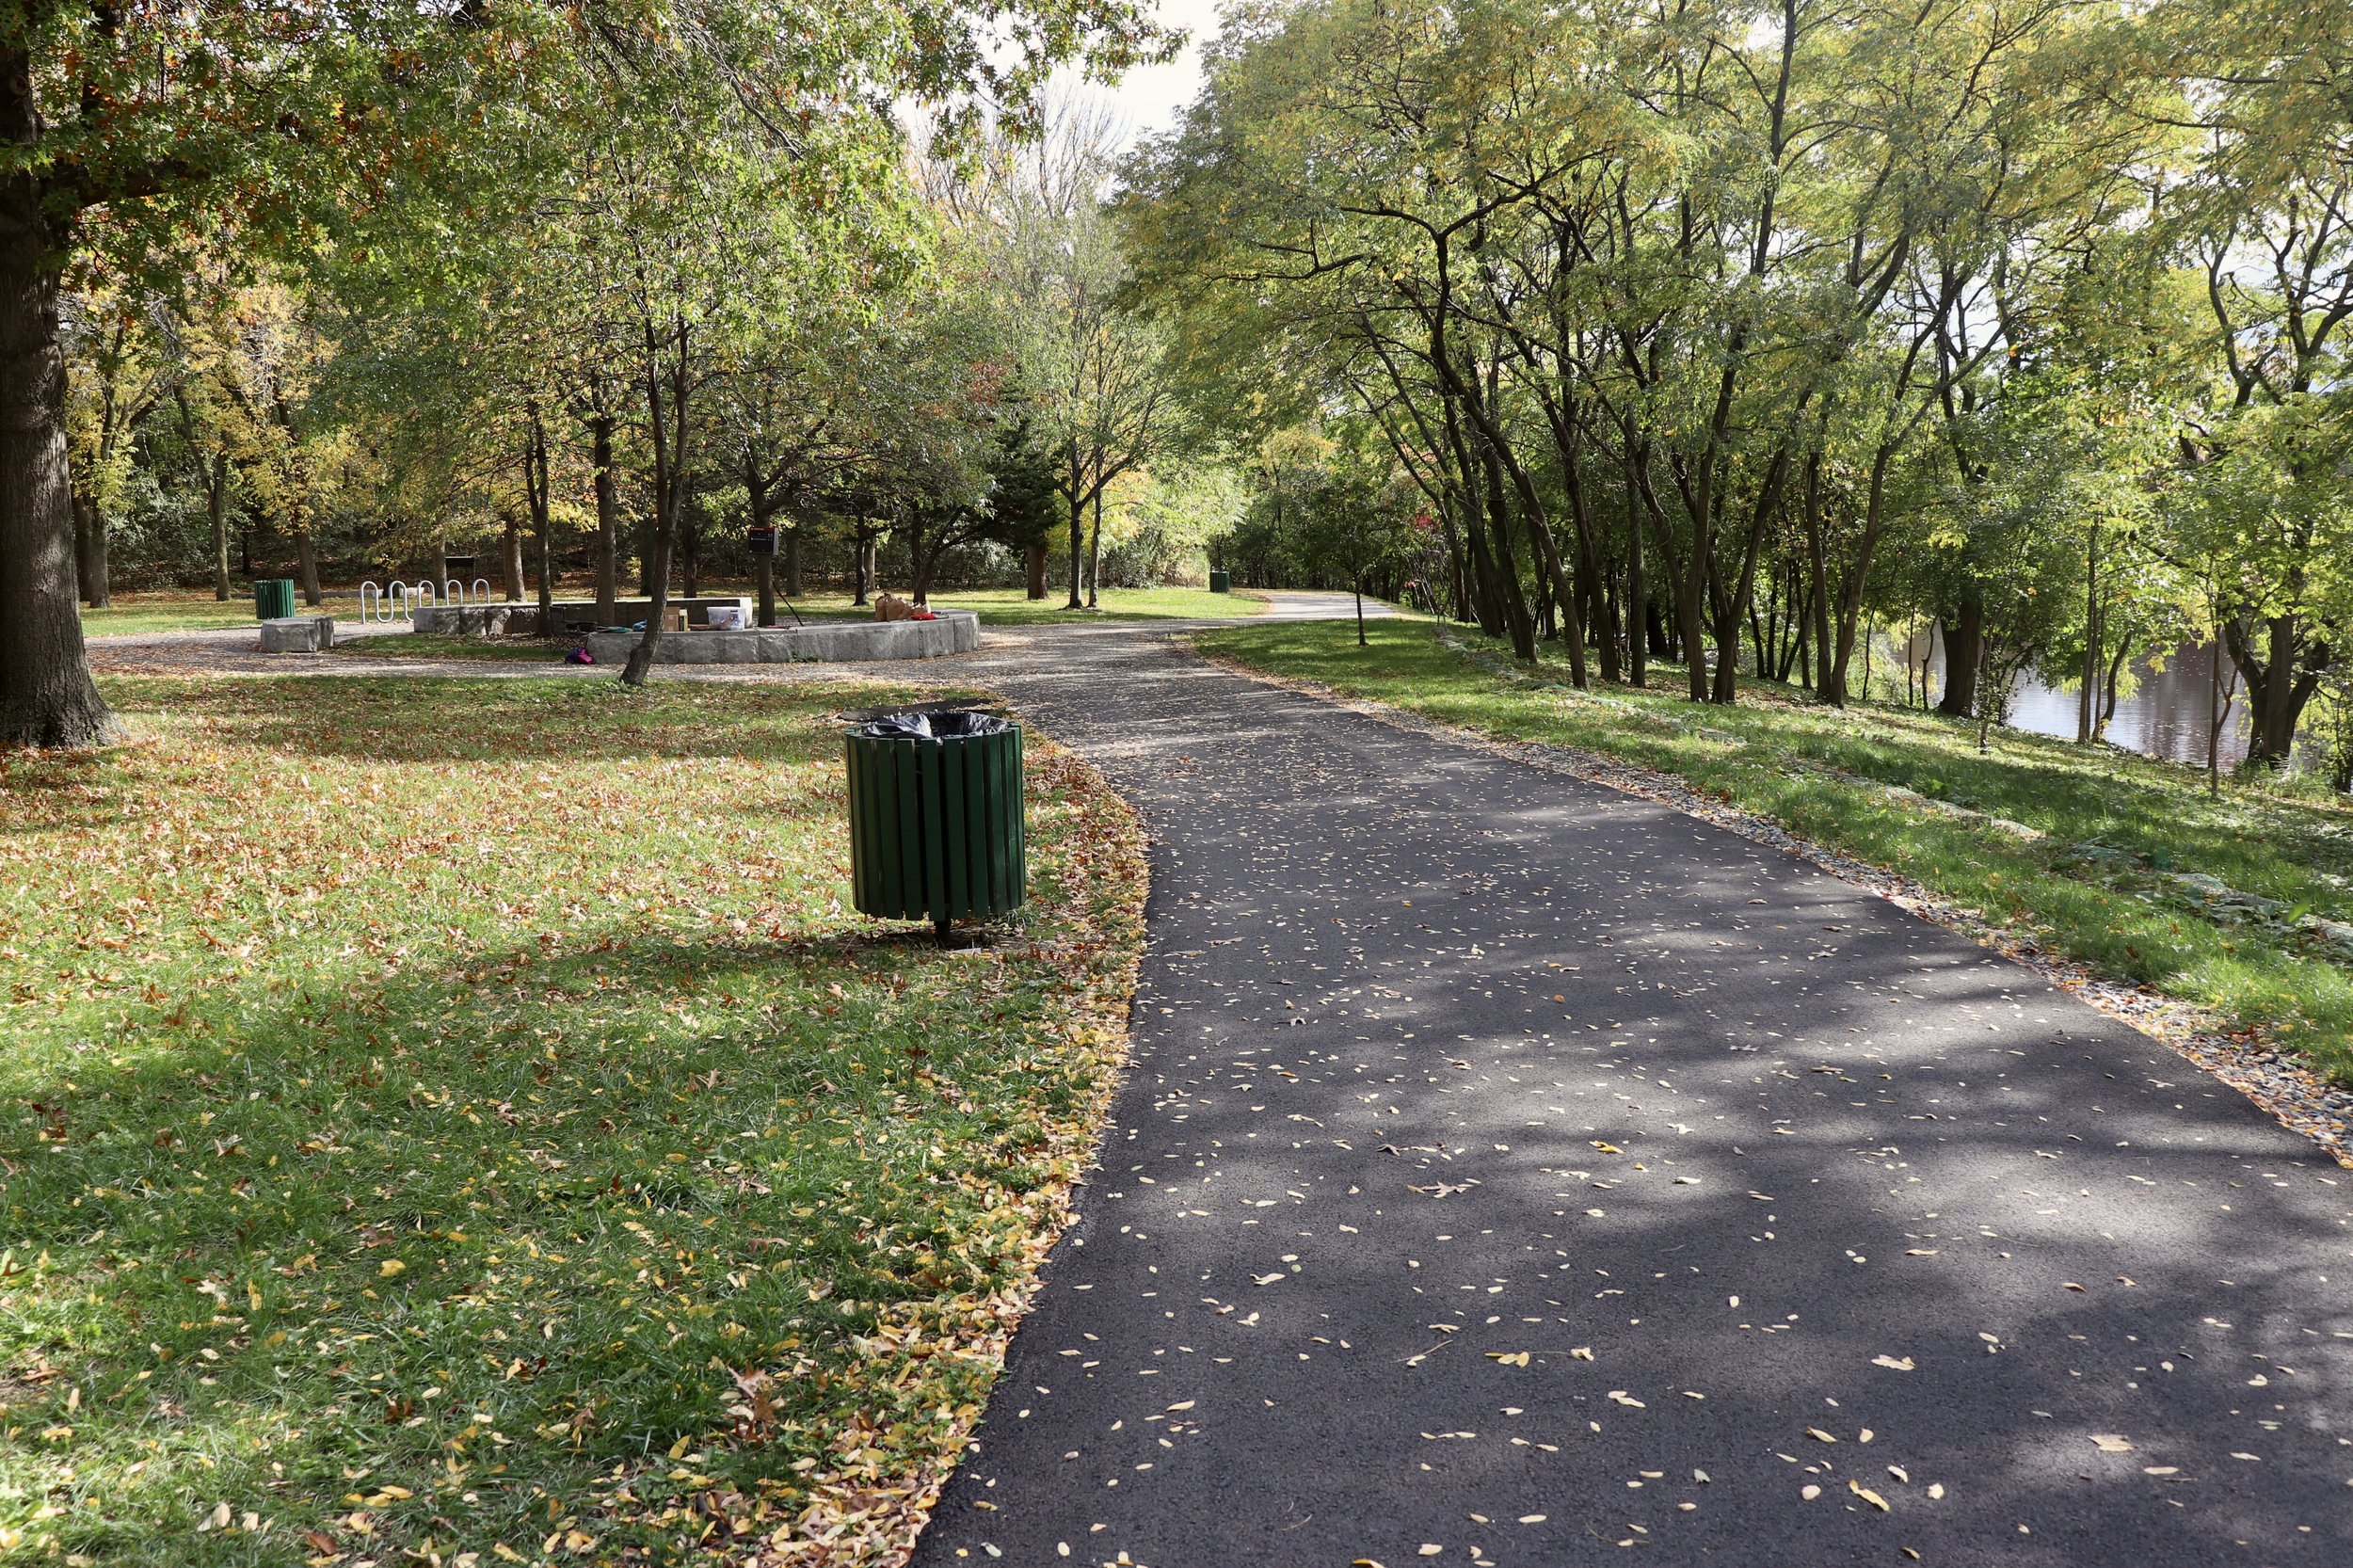  10.18.2022 | A fall walk at Riverbend Park in Medford, enjoying the beautiful shared-use path that was installed by DCR in late 2021. This path will join with the  Clippership Connector  (coming soon) to make up a 10-mile continuous greenway along t